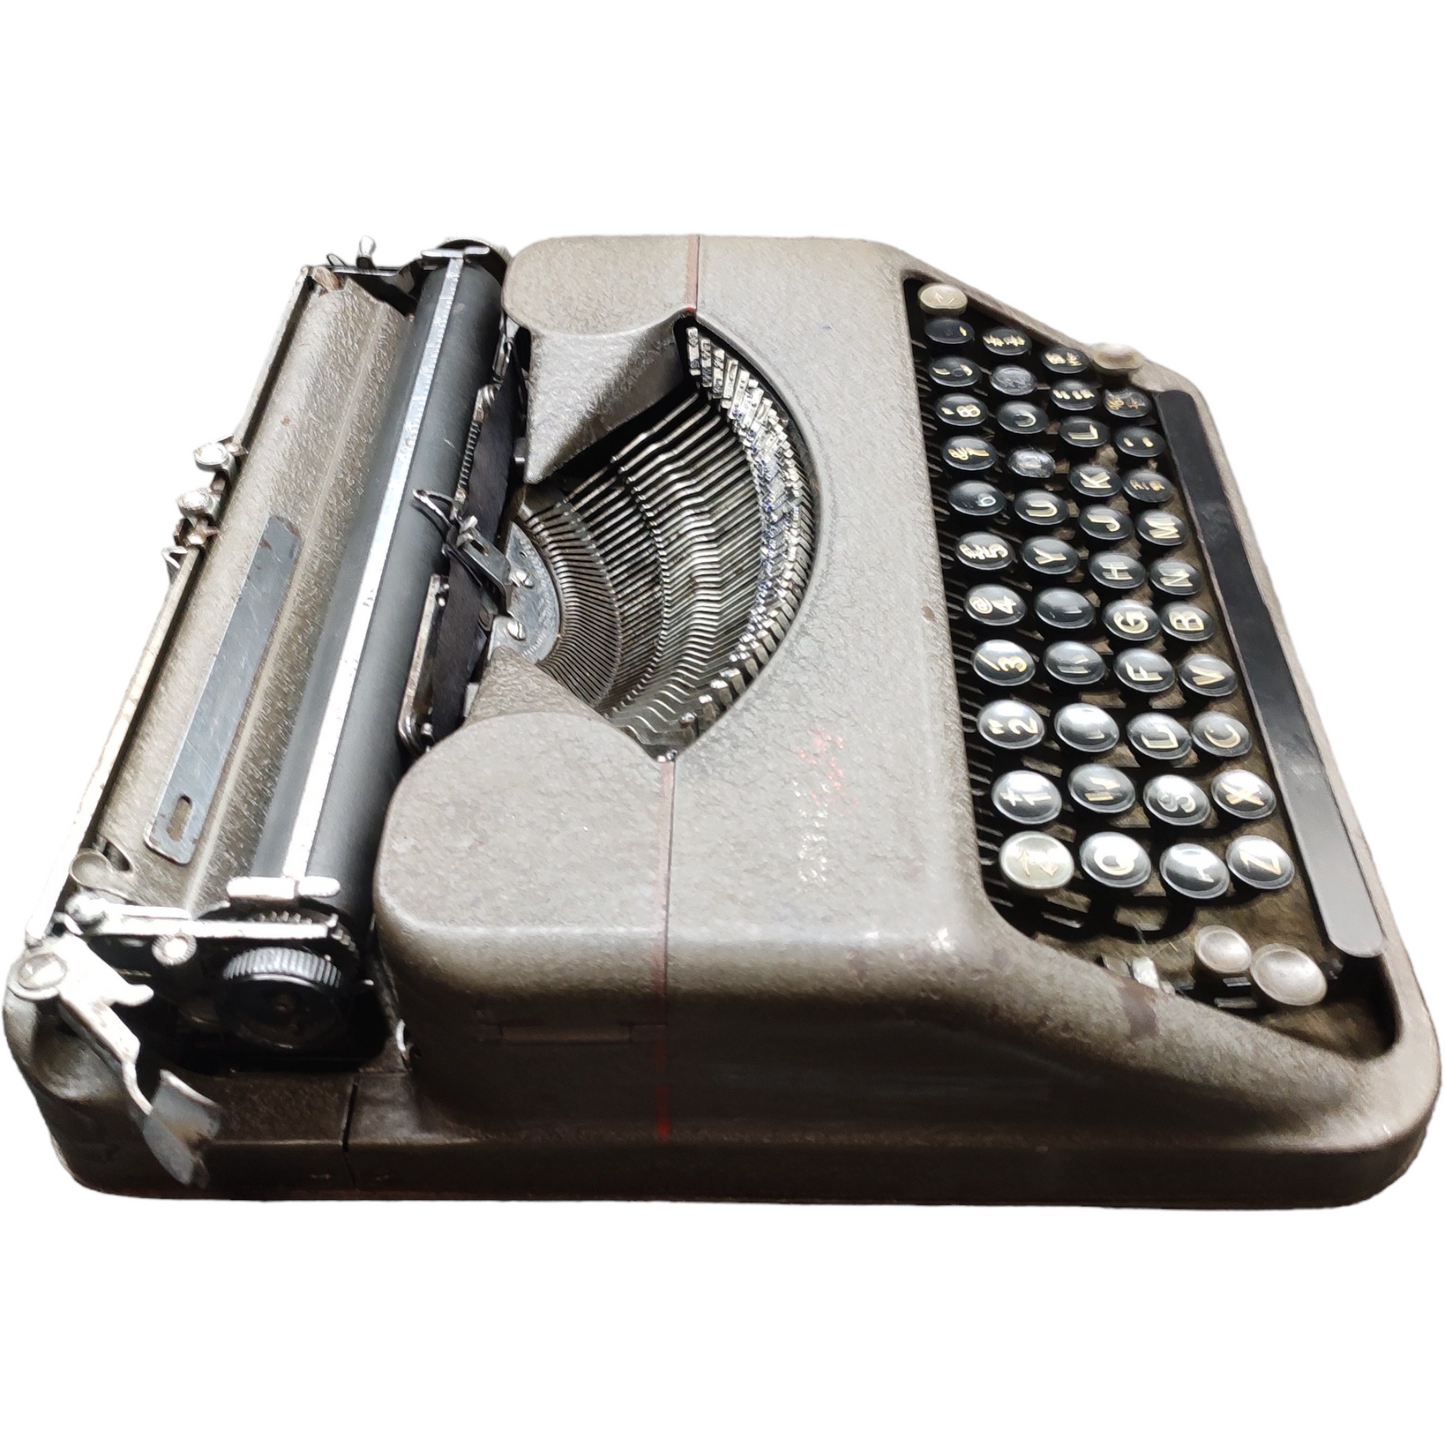 Image of Hermes Baby Typewriter. Available from universaltypewritercompany.in